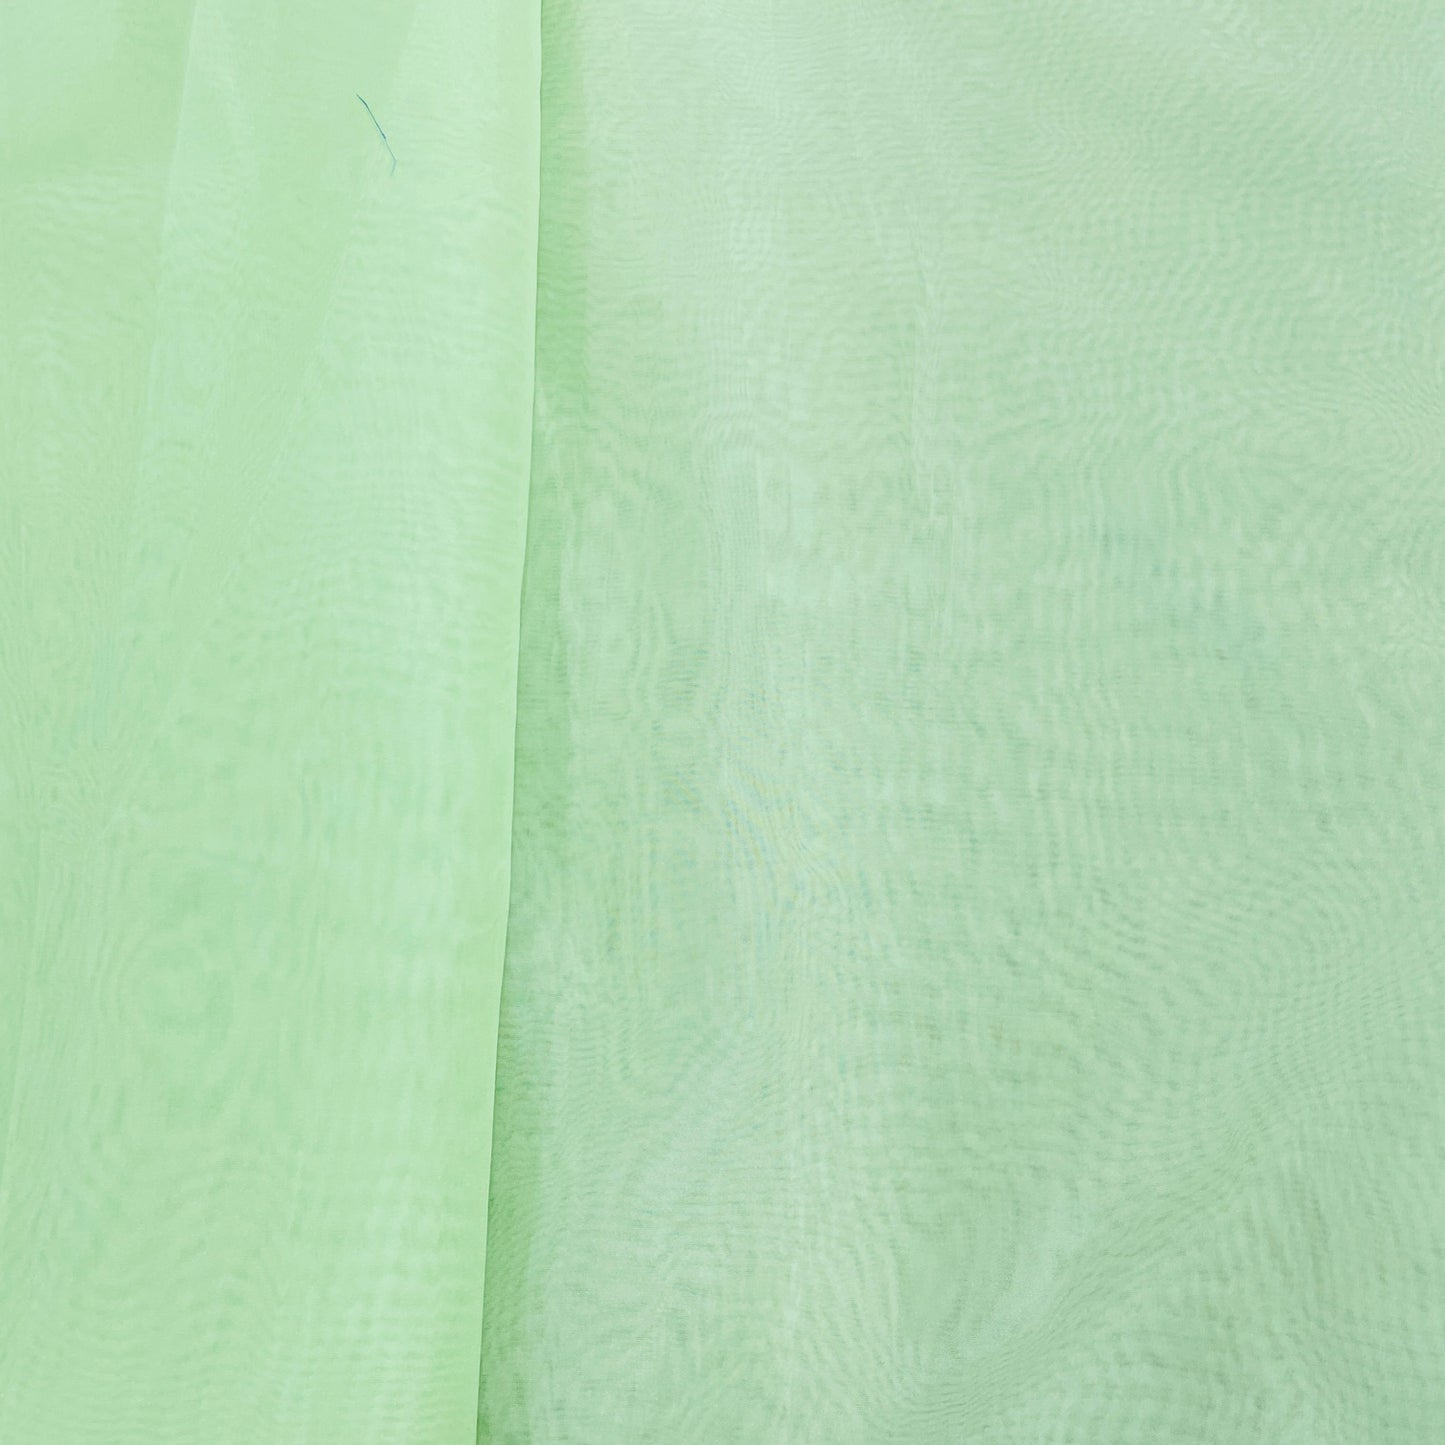 Exclusive Mint Green Solid Organza Fabric